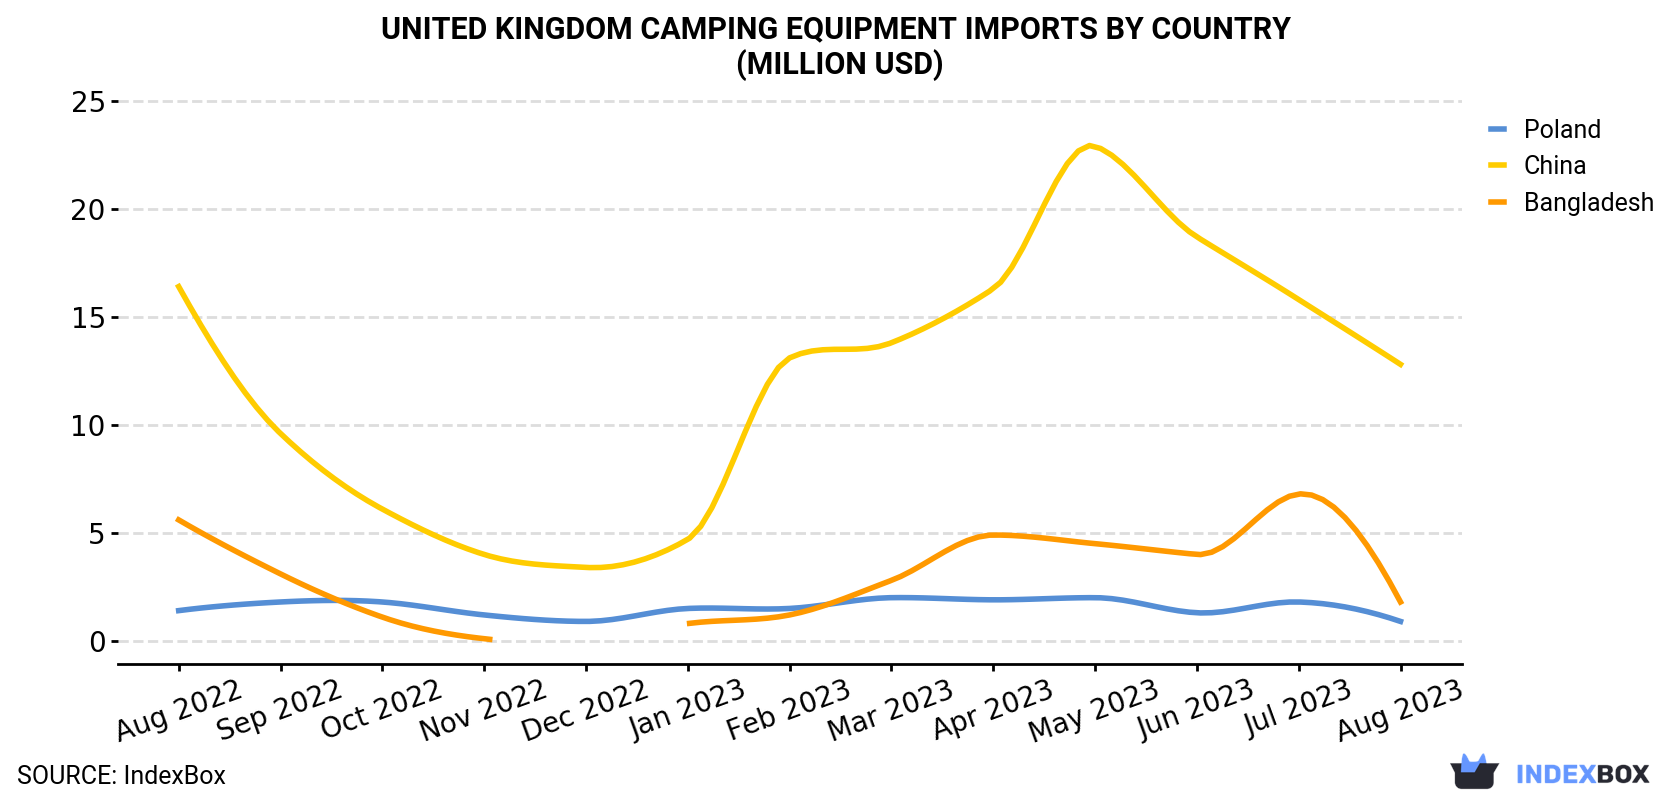 United Kingdom Camping Equipment Imports By Country (Million USD)